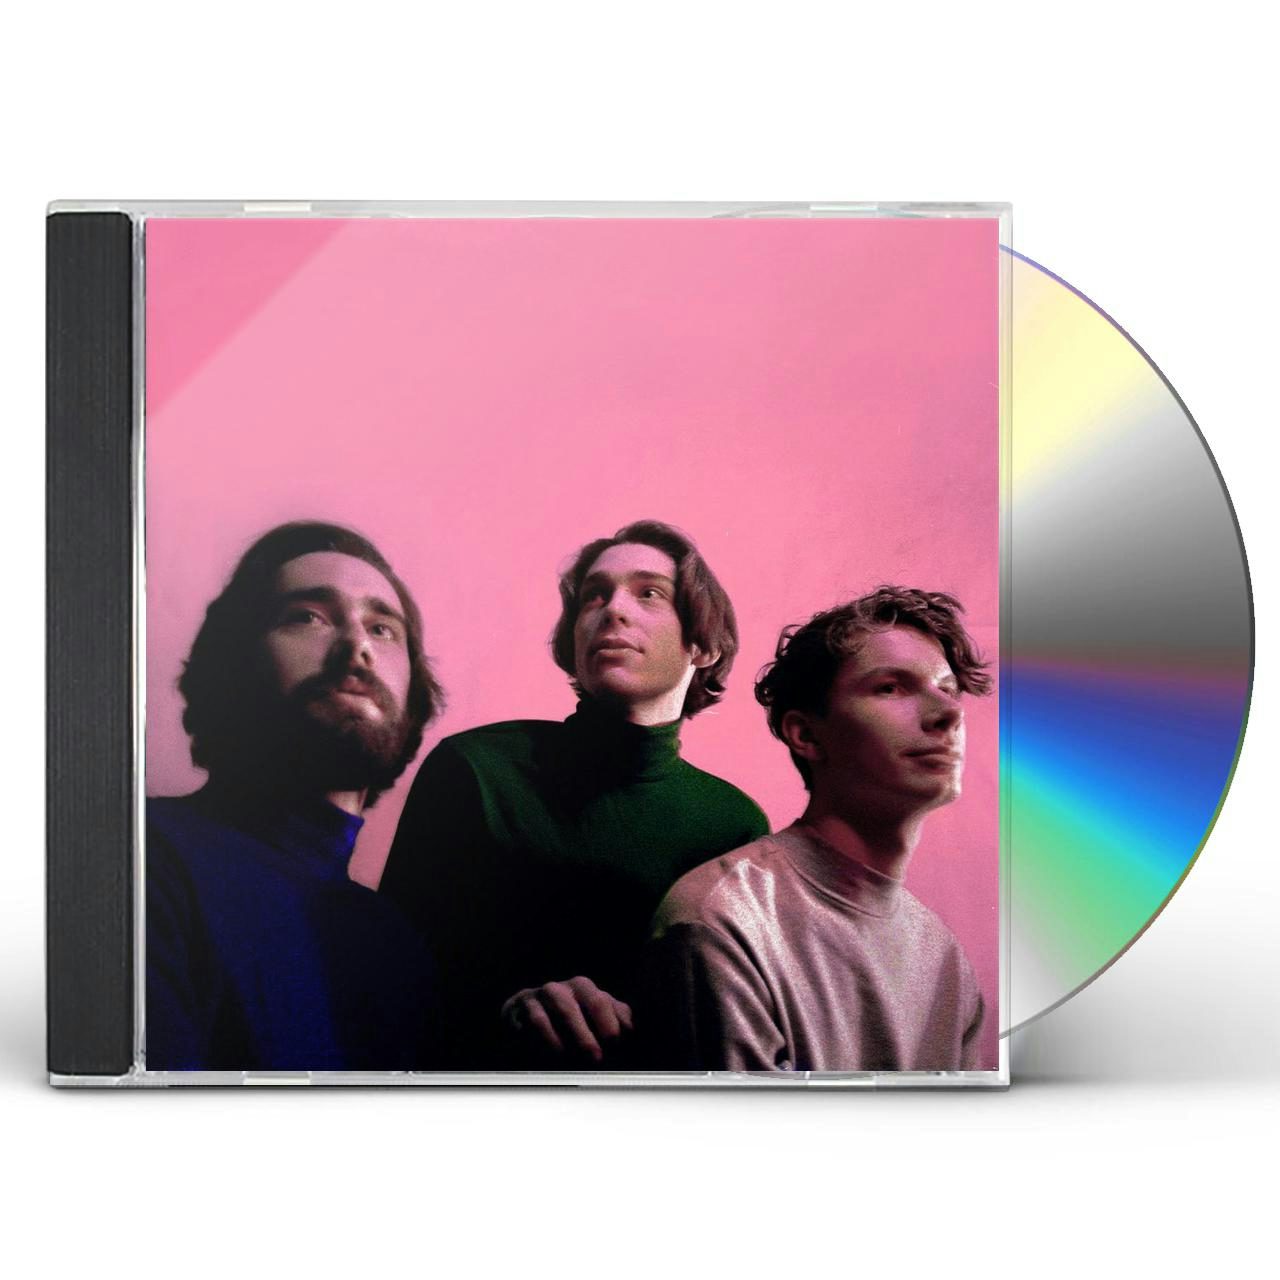 remo drive greatest hits